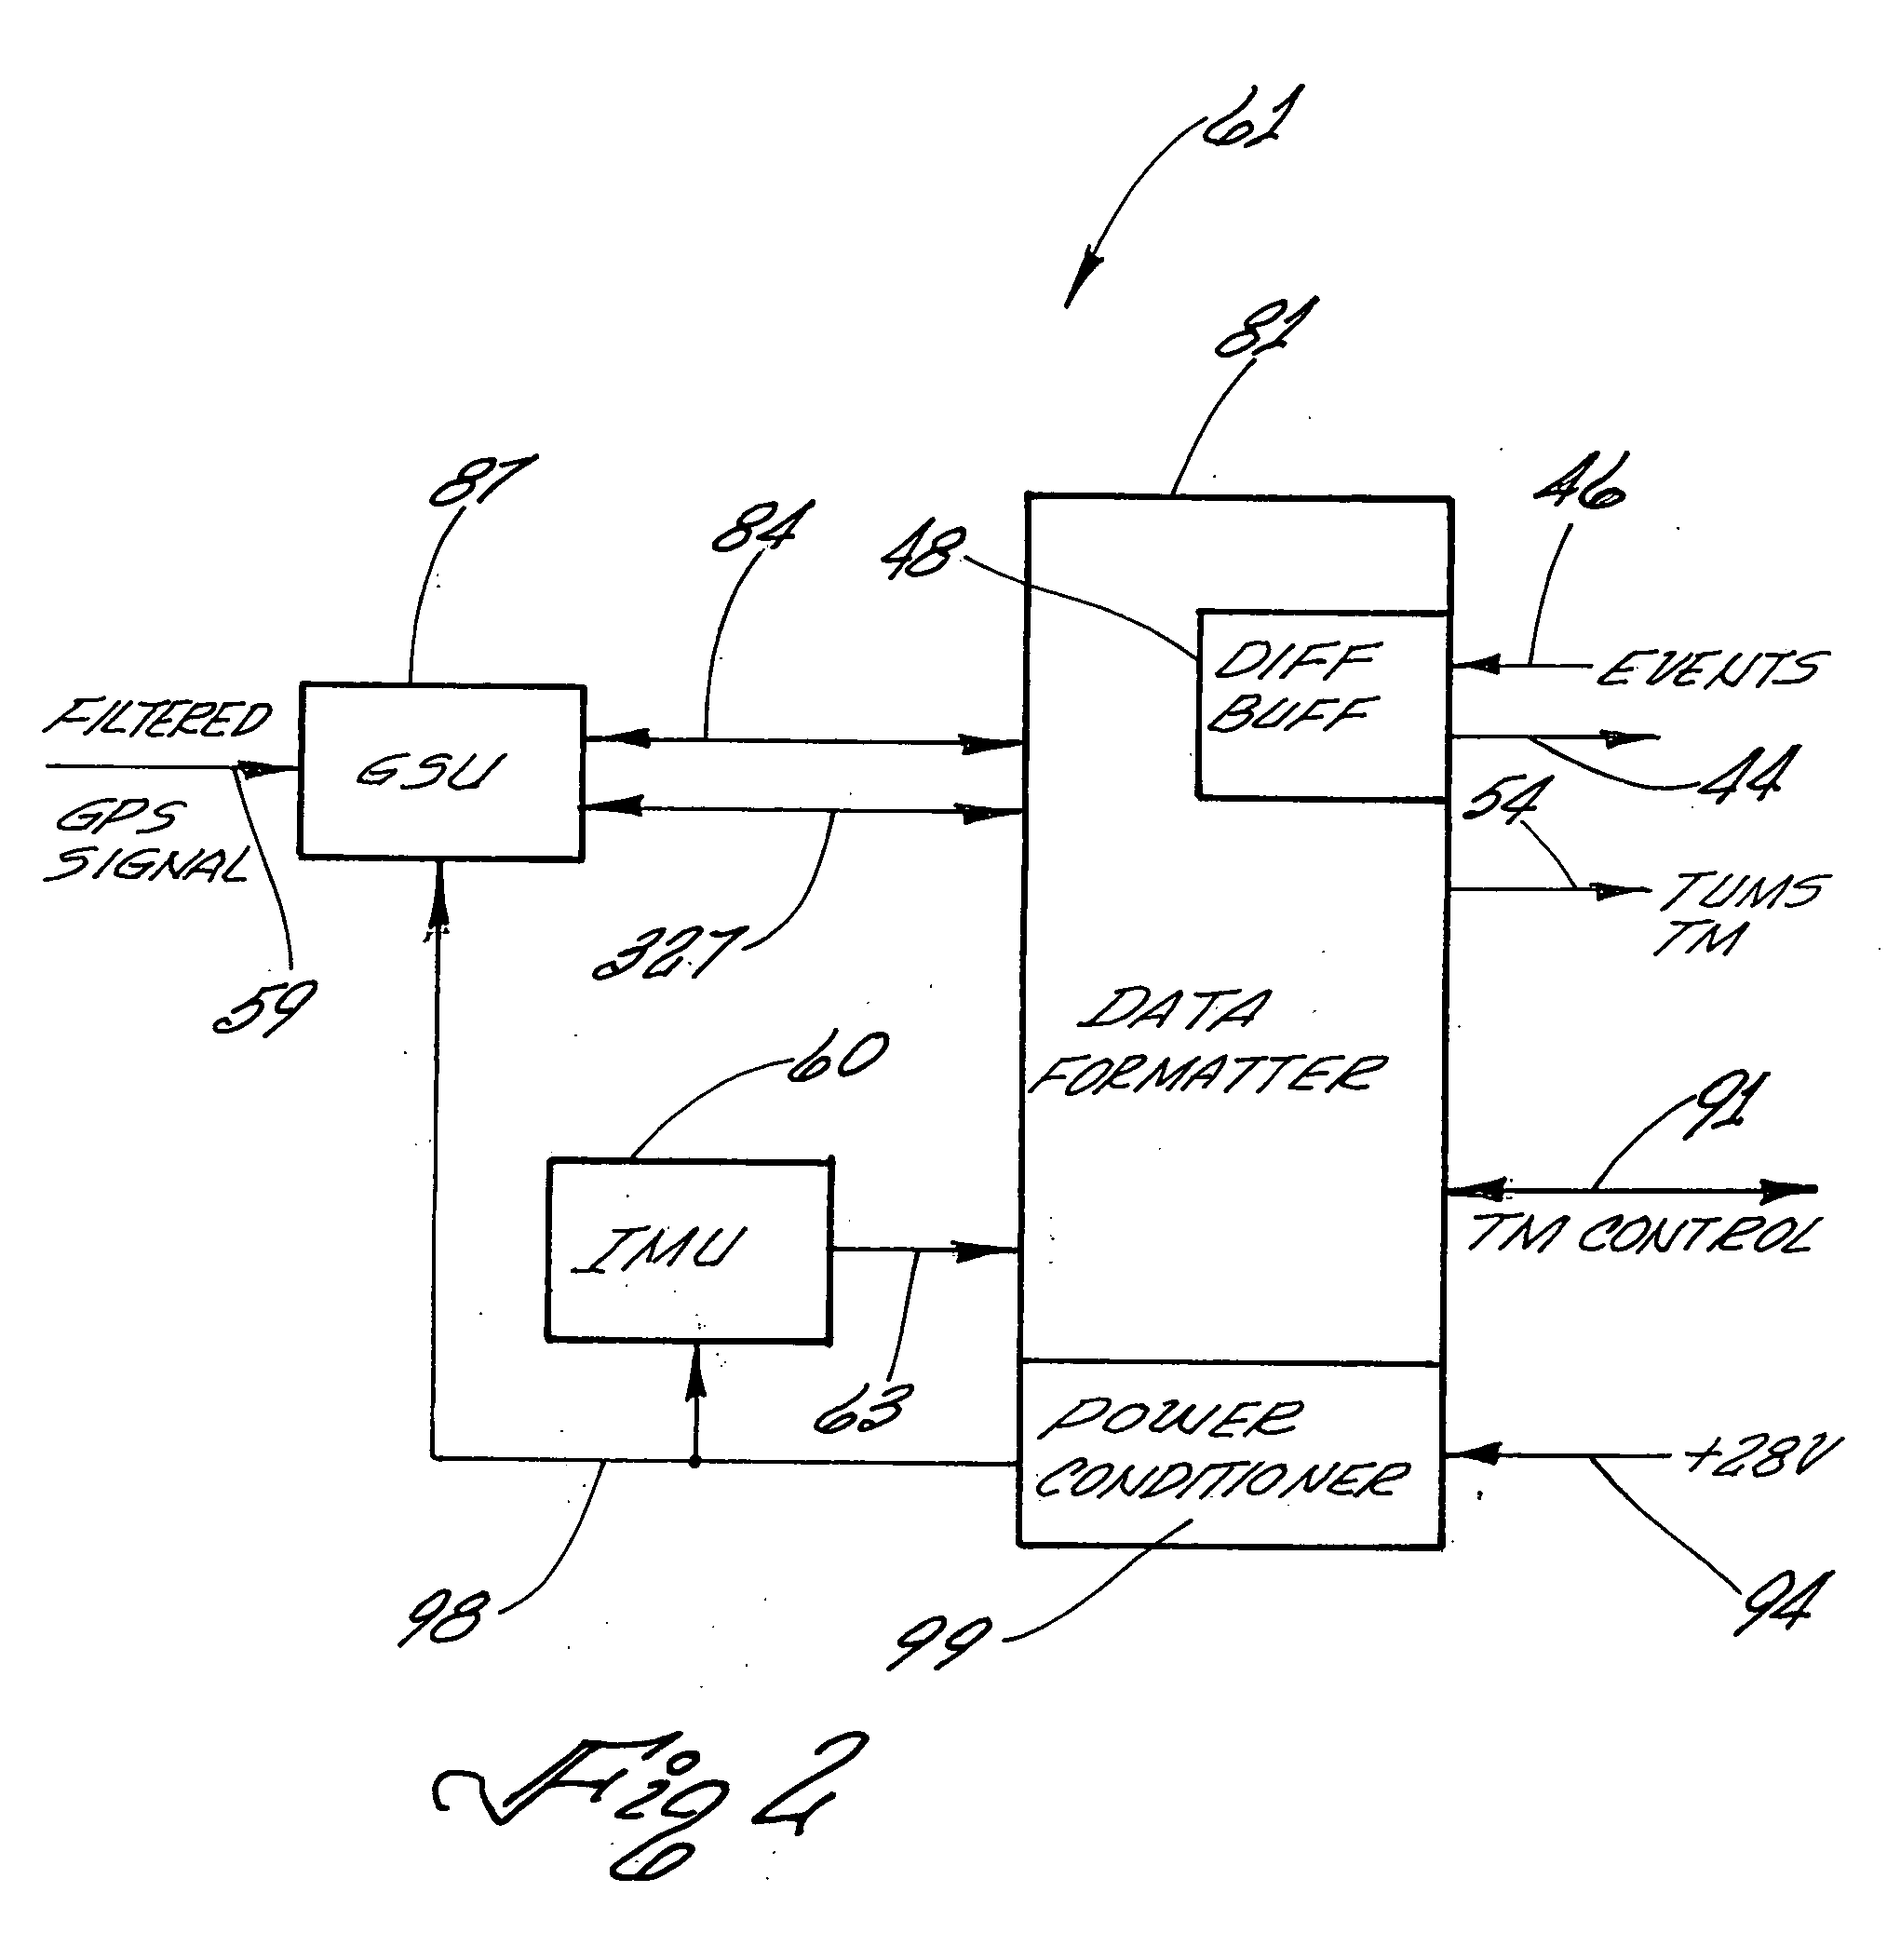 Message formatting system to improve GPS and IMU positional reporting for a vehicle